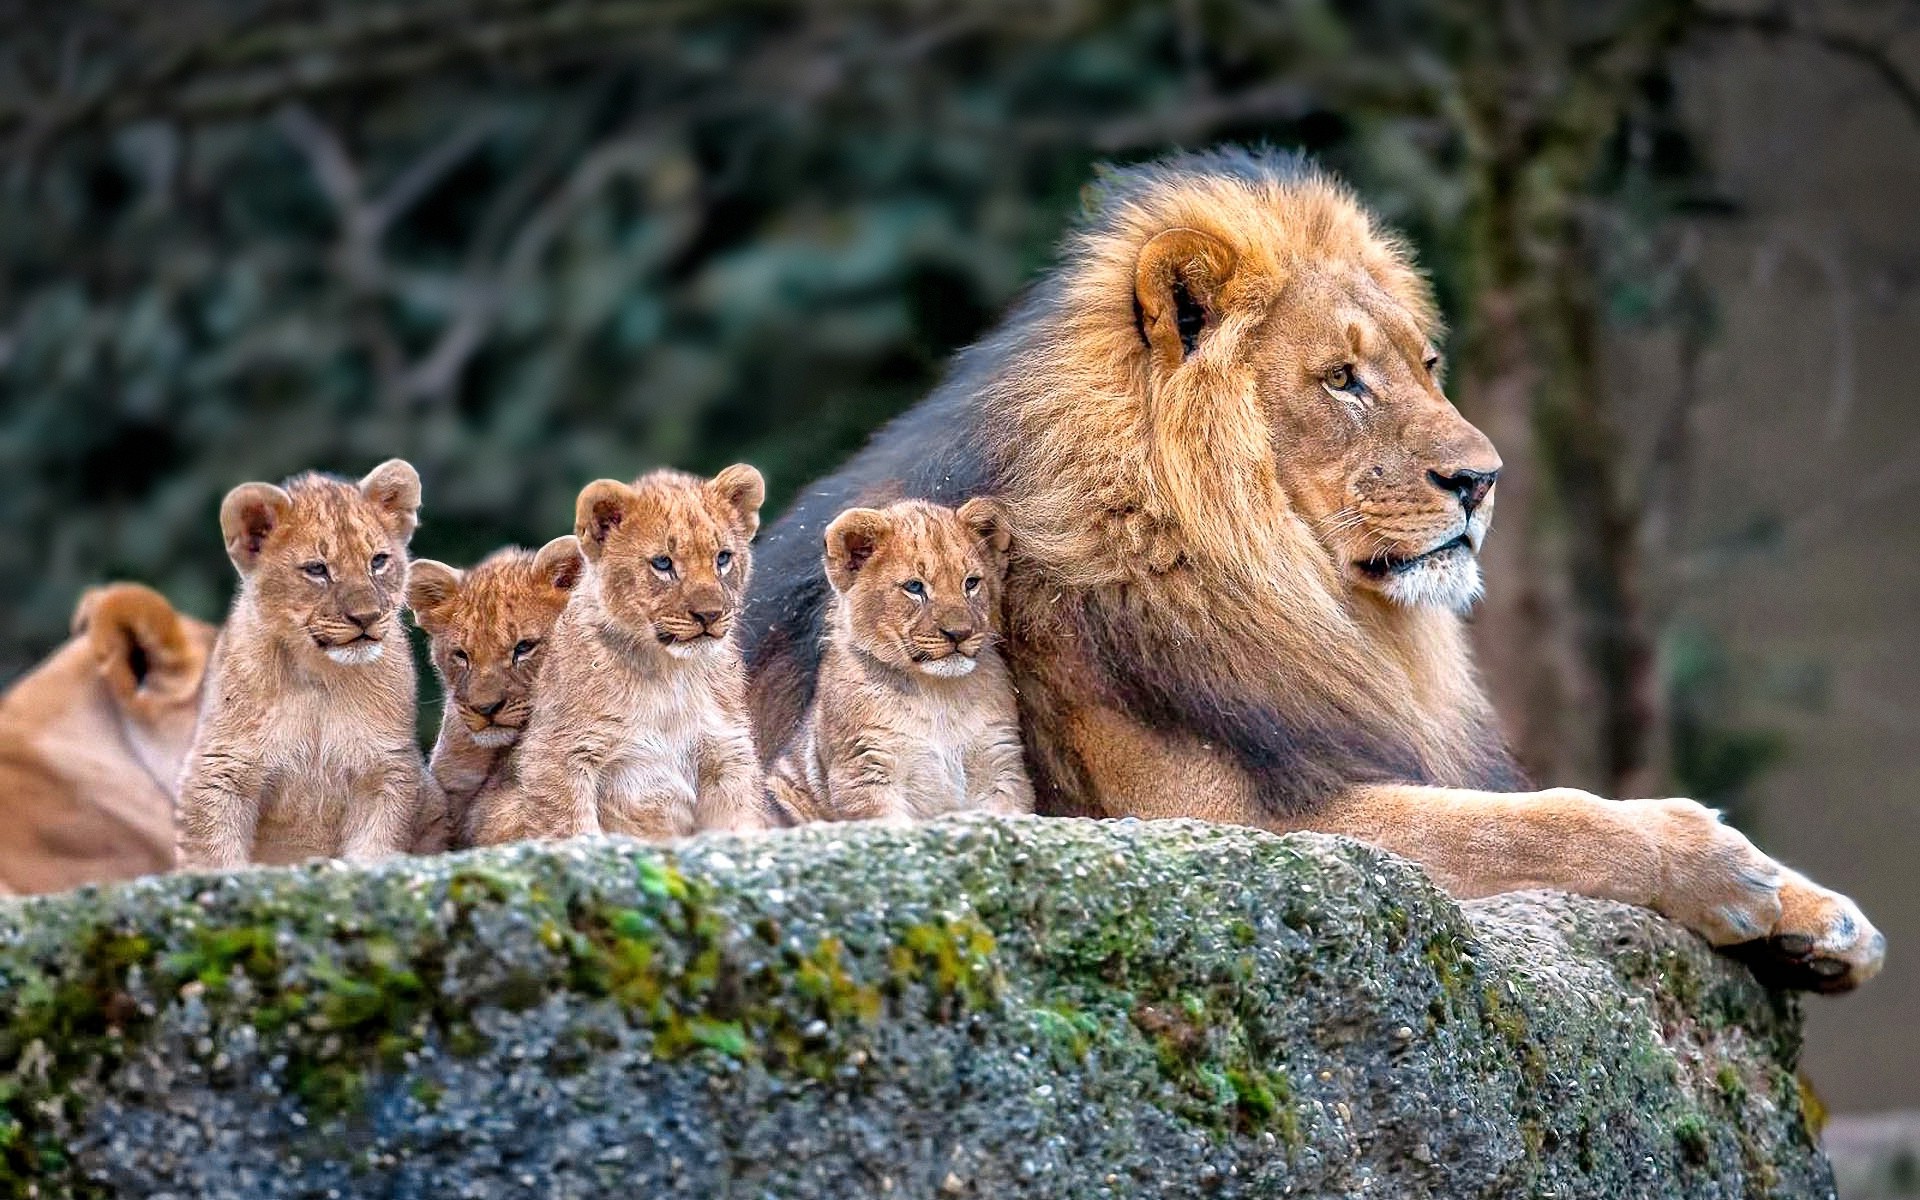 lion-nature-animals-baby-animals-wallpapers-hd-desktop-and-mobile